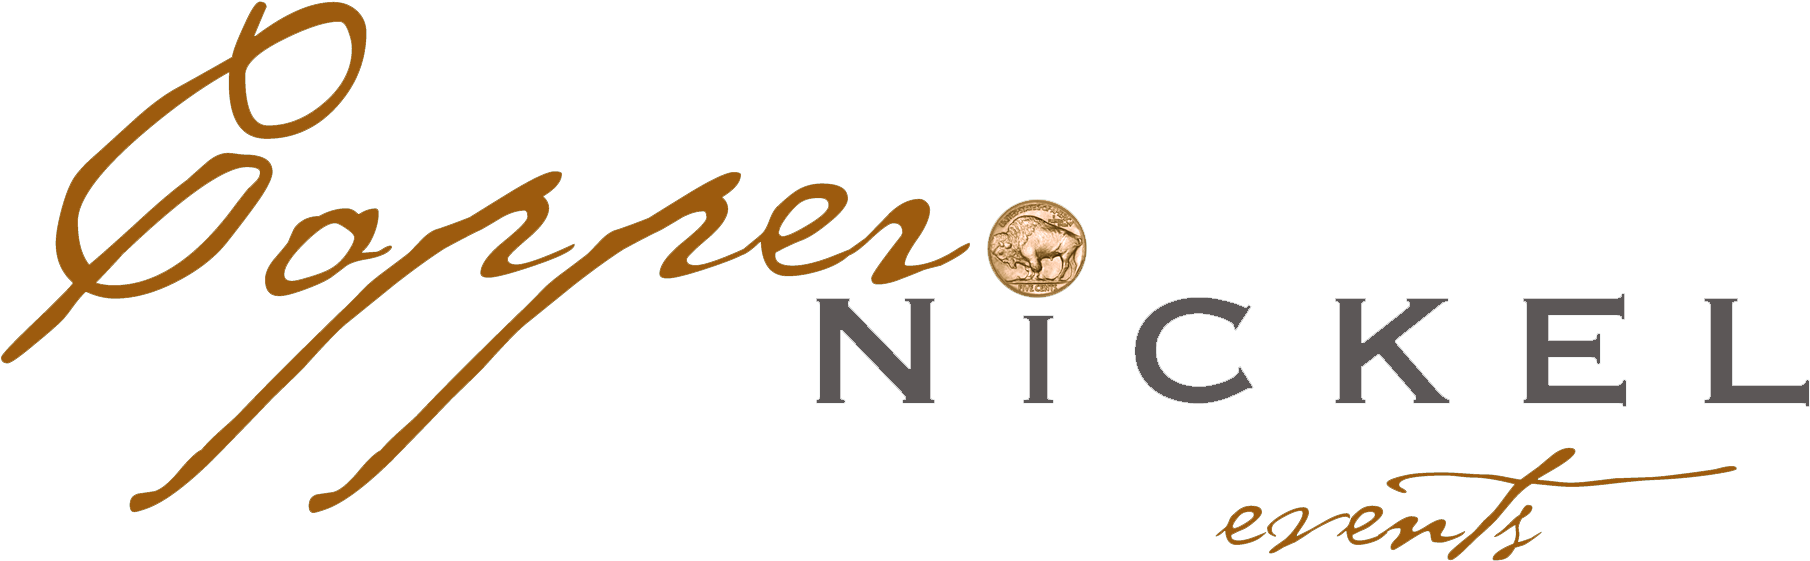 Copper Nickel Events Logo PNG